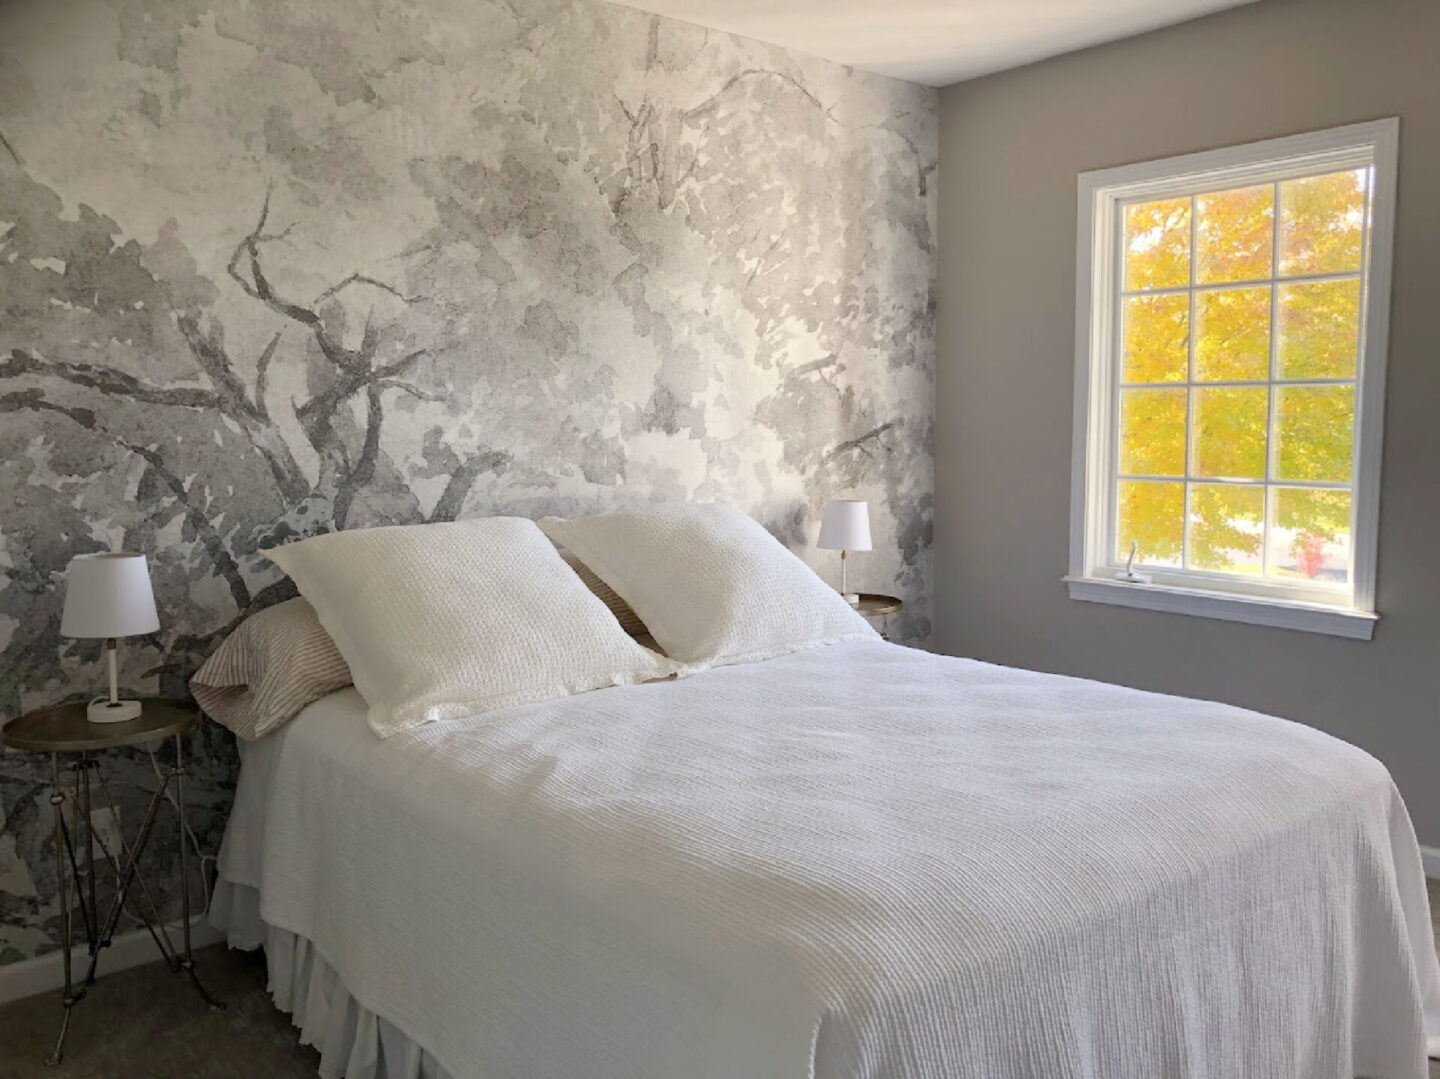 Guest bedroom with grisaille wallpaper mural and gold maple tree through window.